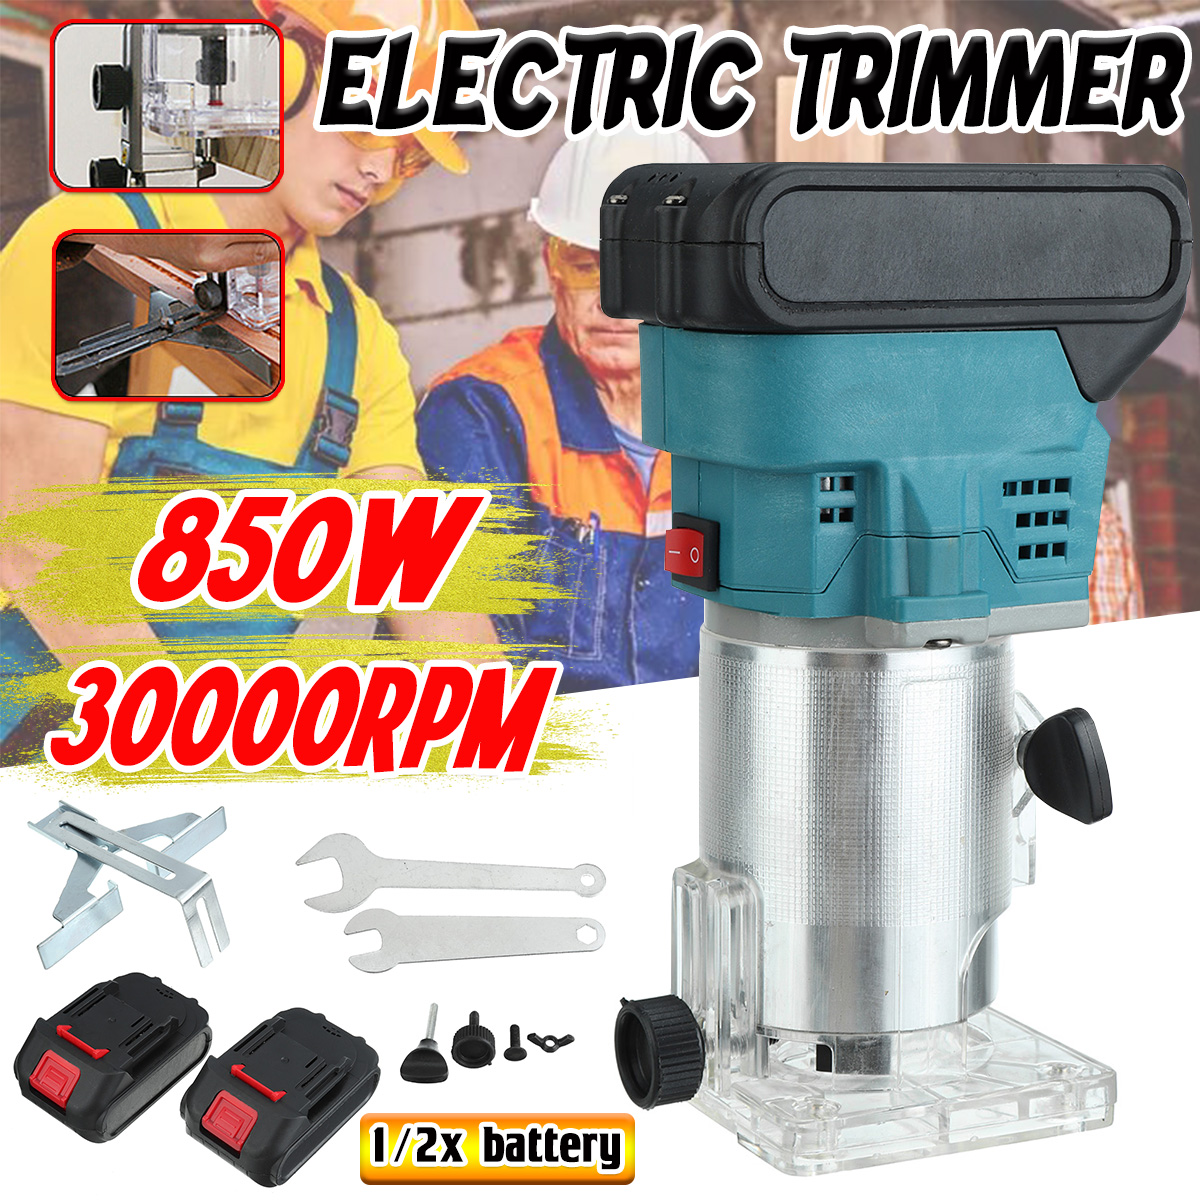 635mm-Cordless-Electric-Trimmer-Compact-Palm-Router-Corded-Woodworking-Trimming-Edge-Guide-Wood-W-12-1854950-2